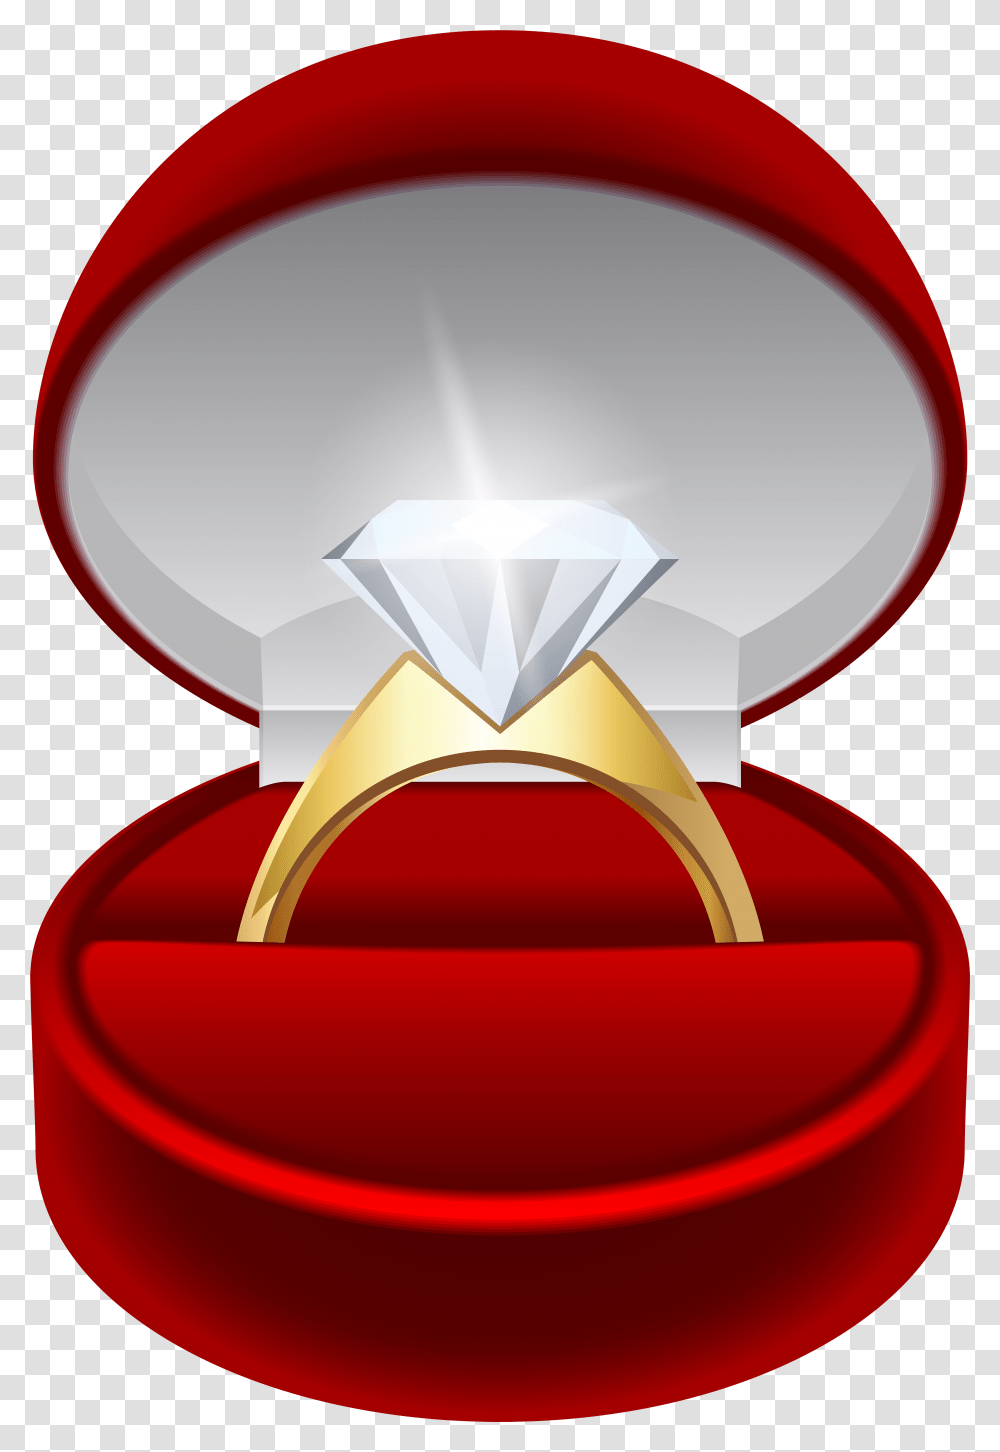 Engagement Ring Clip Art Image Engagement Ring, Hourglass, Crystal, Trophy, Accessories Transparent Png